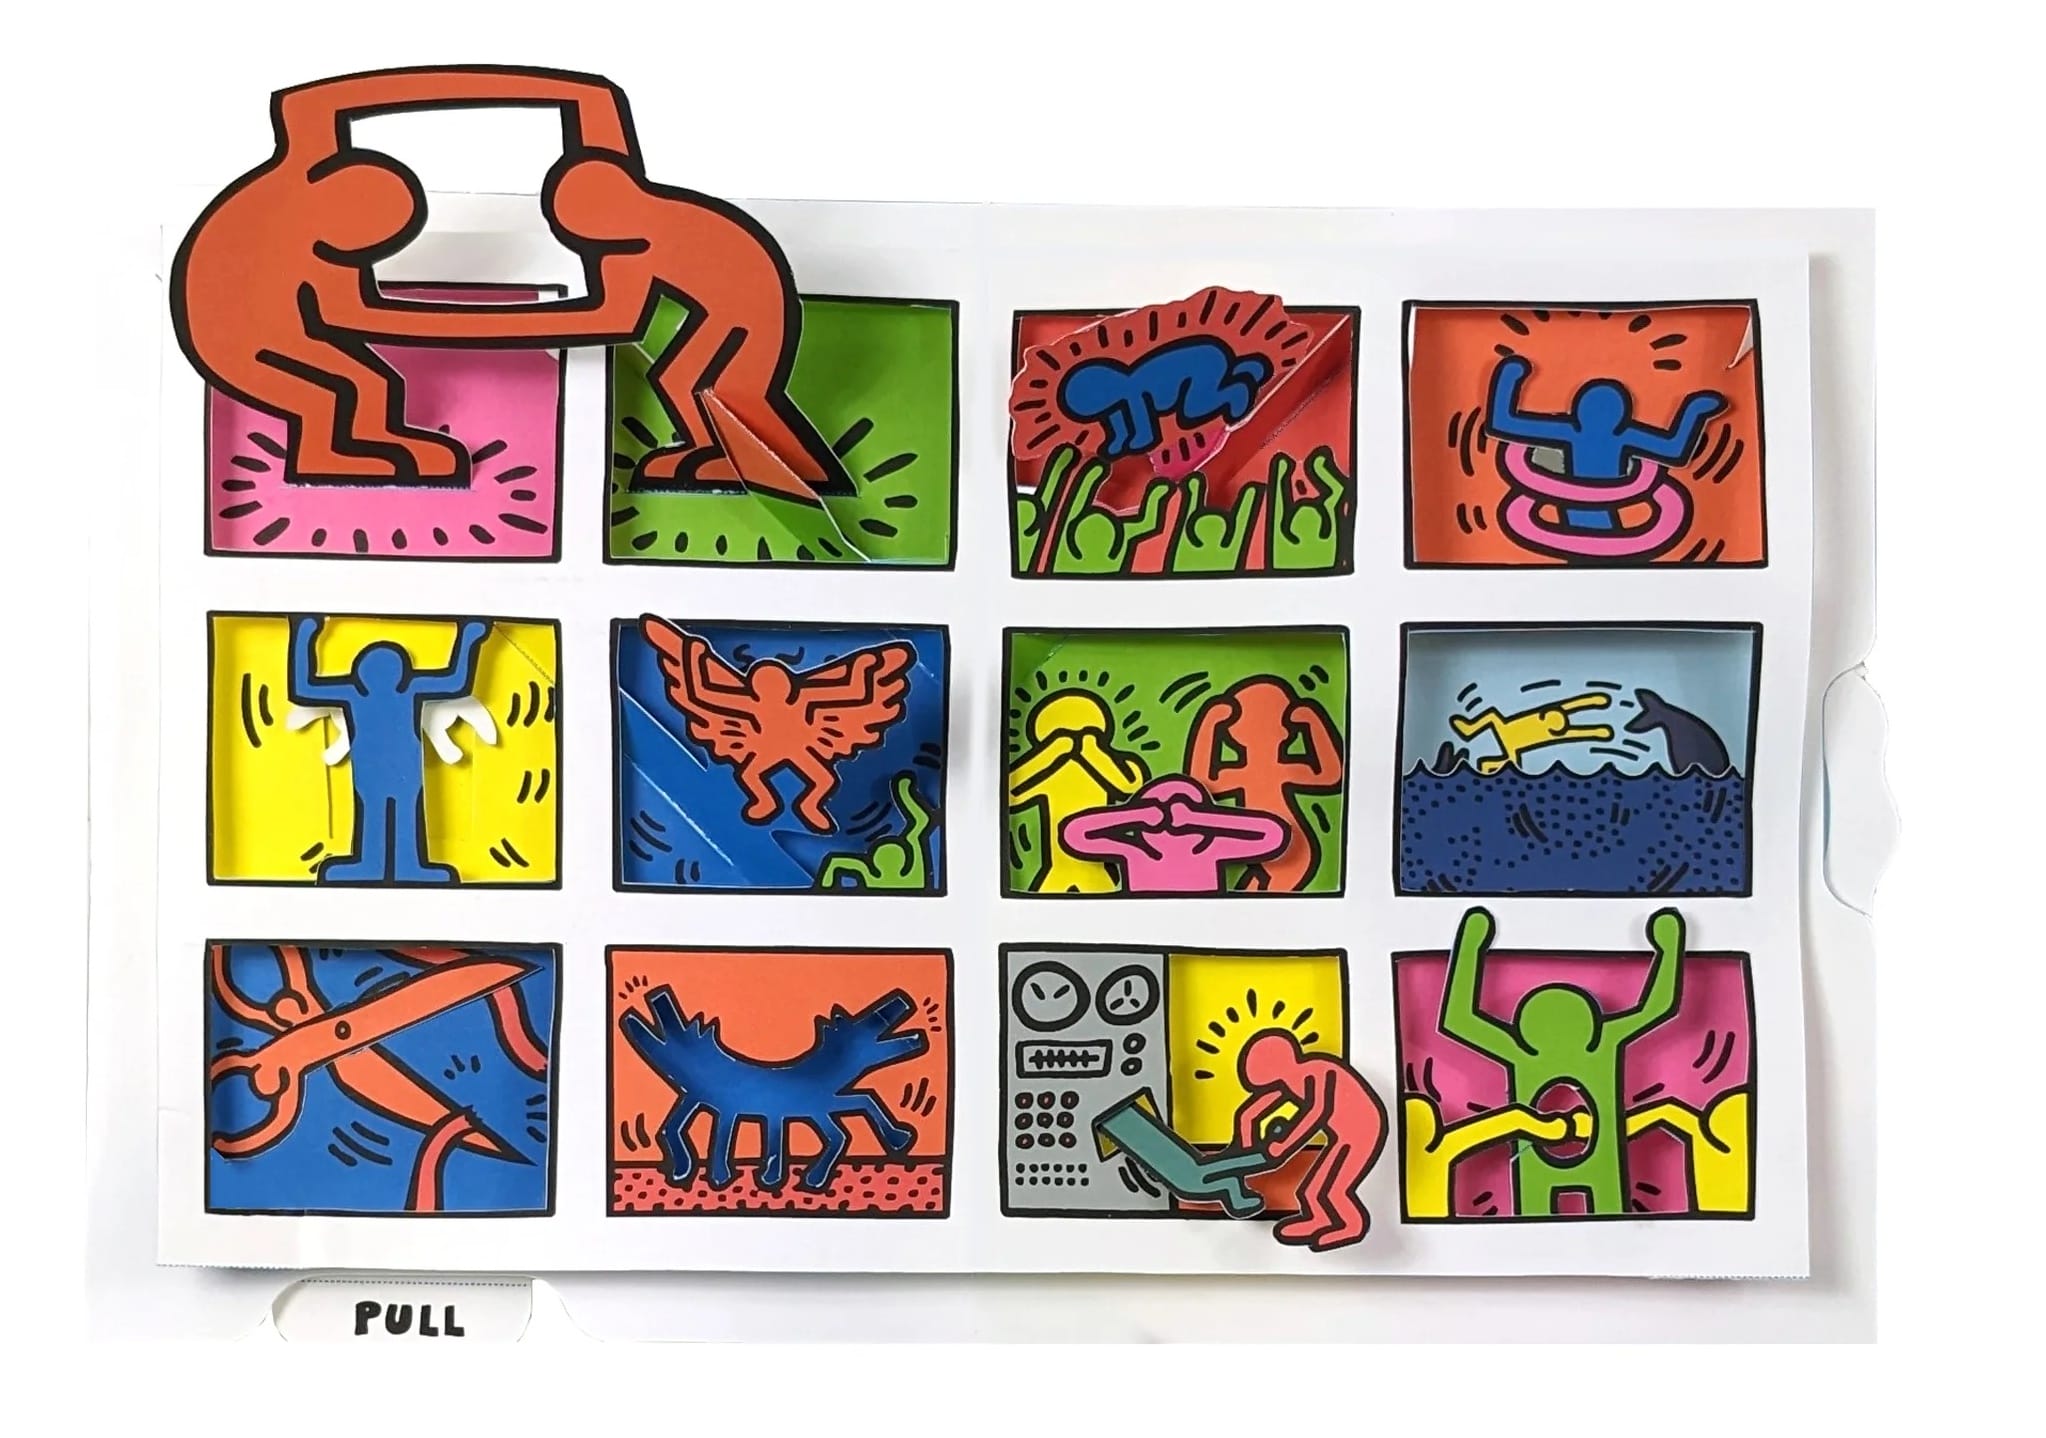 a pop-up paper spread from a pop-up book of artwork by Keith Haring, this piece depicting a grid of 12 smaller, cartoon images with scenes of angels and people interacting